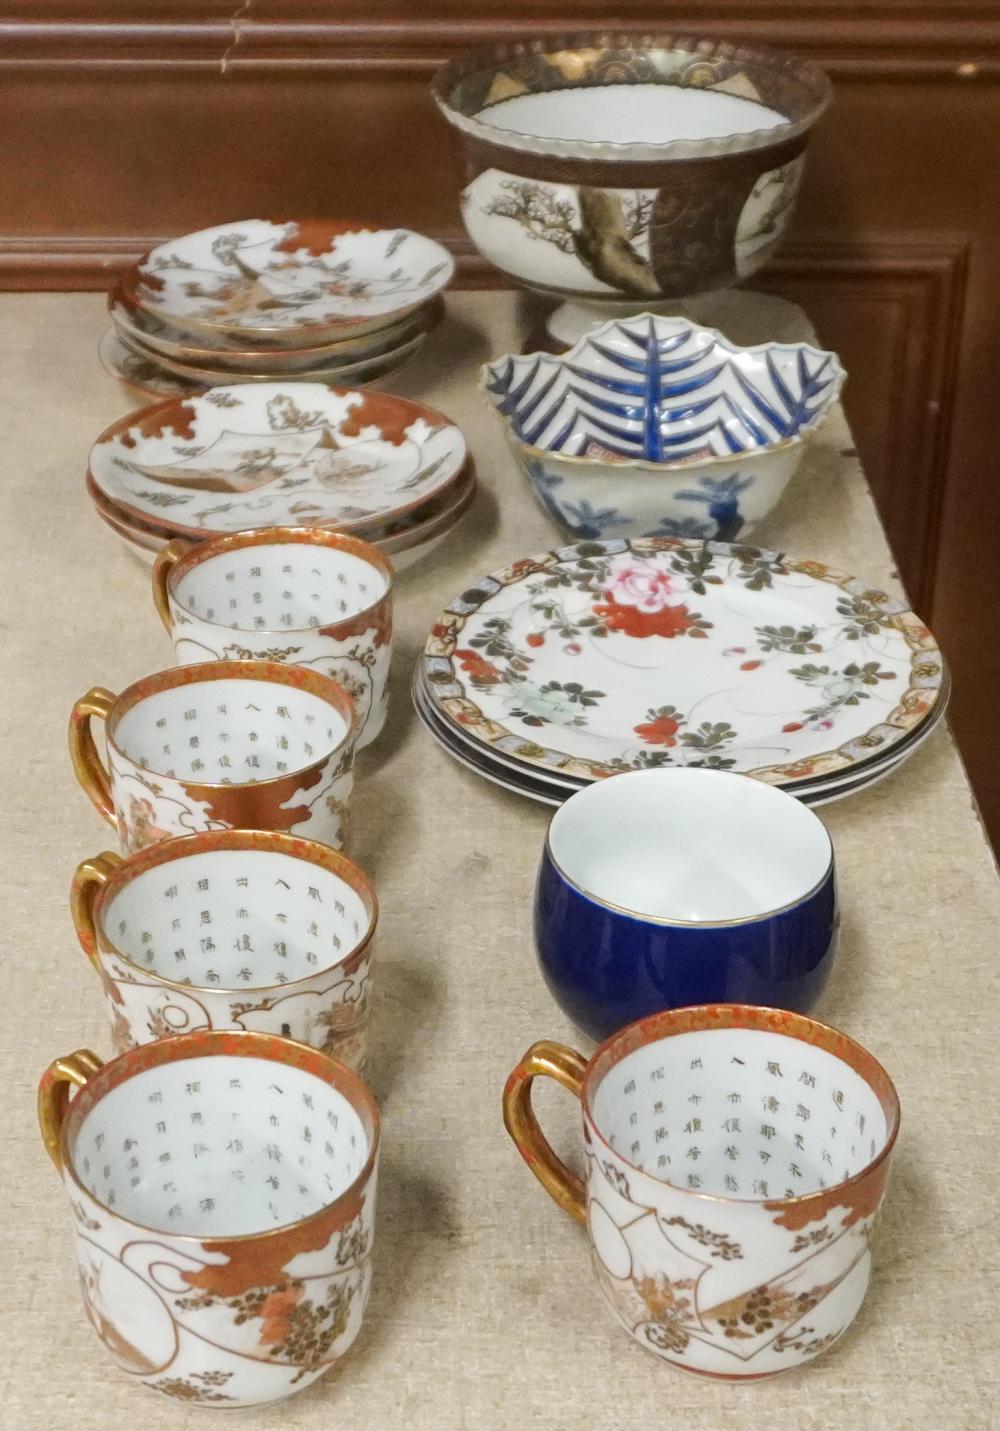 GROUP OF ASSORTED CHINESE PORCELAIN 2e7a04